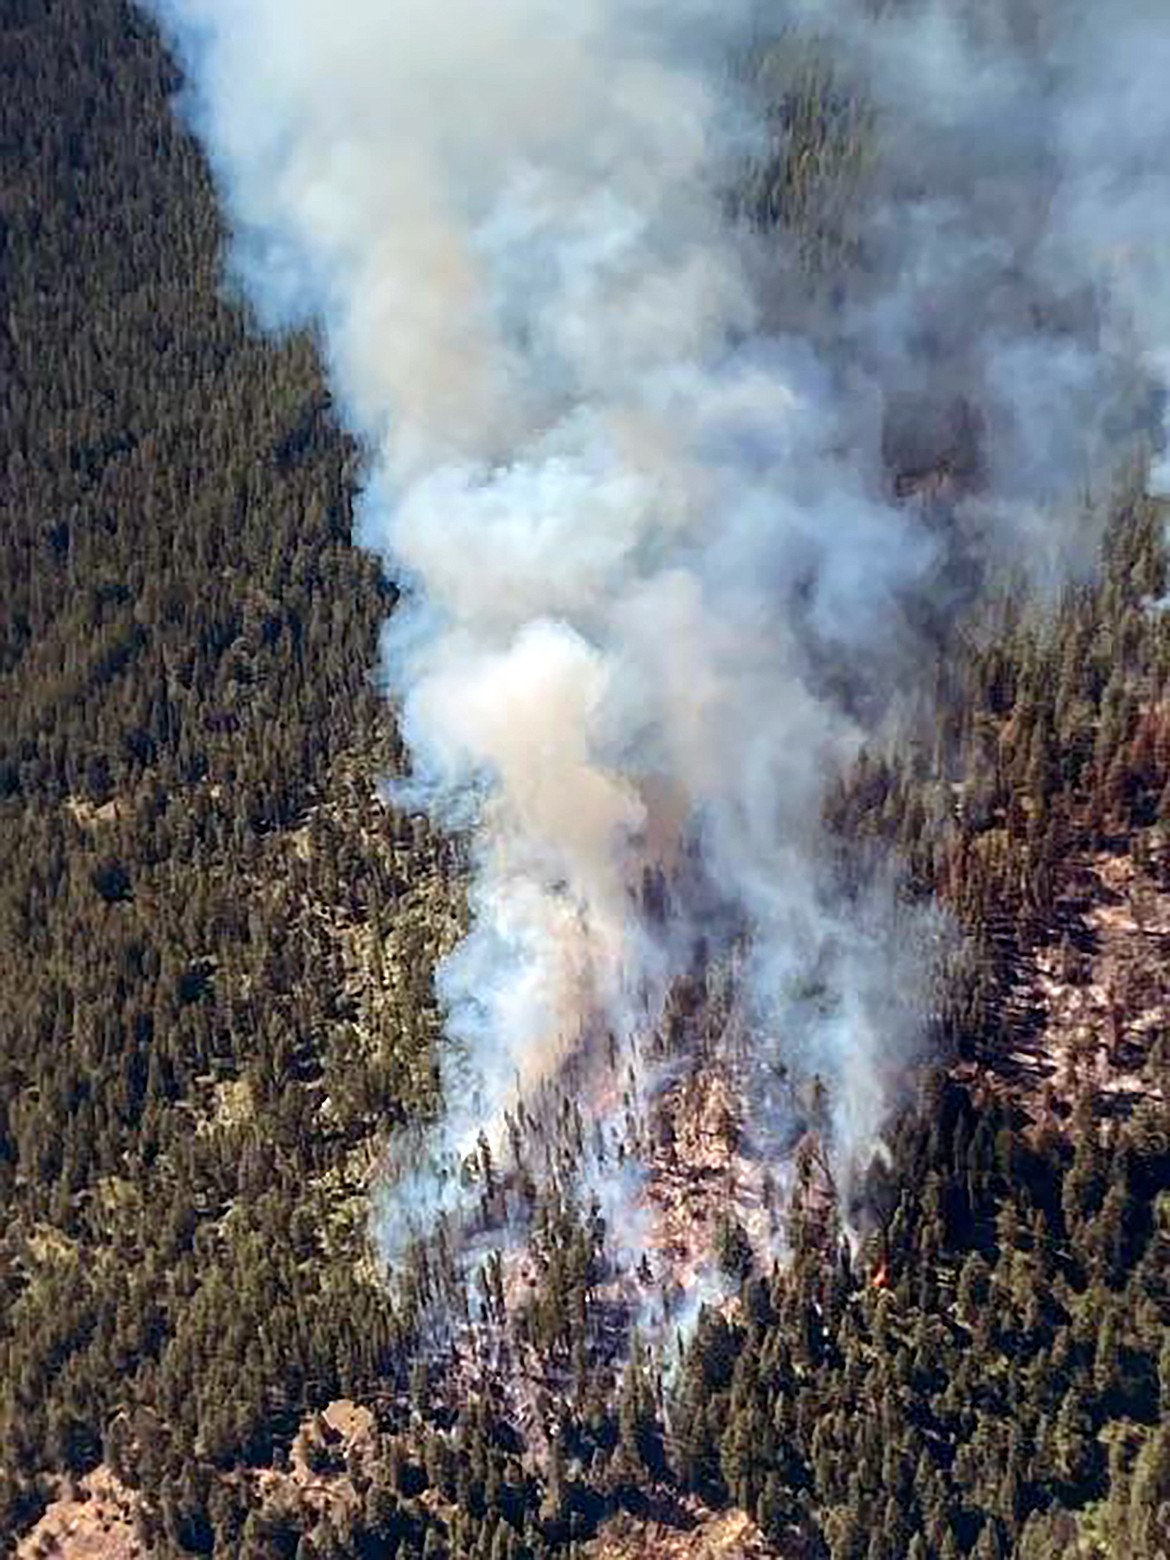 An aerial view of the Eneas Peak Fire in Boundary County taken early on in the fire. The fire is now classified as part of the Kootenai River Complex.